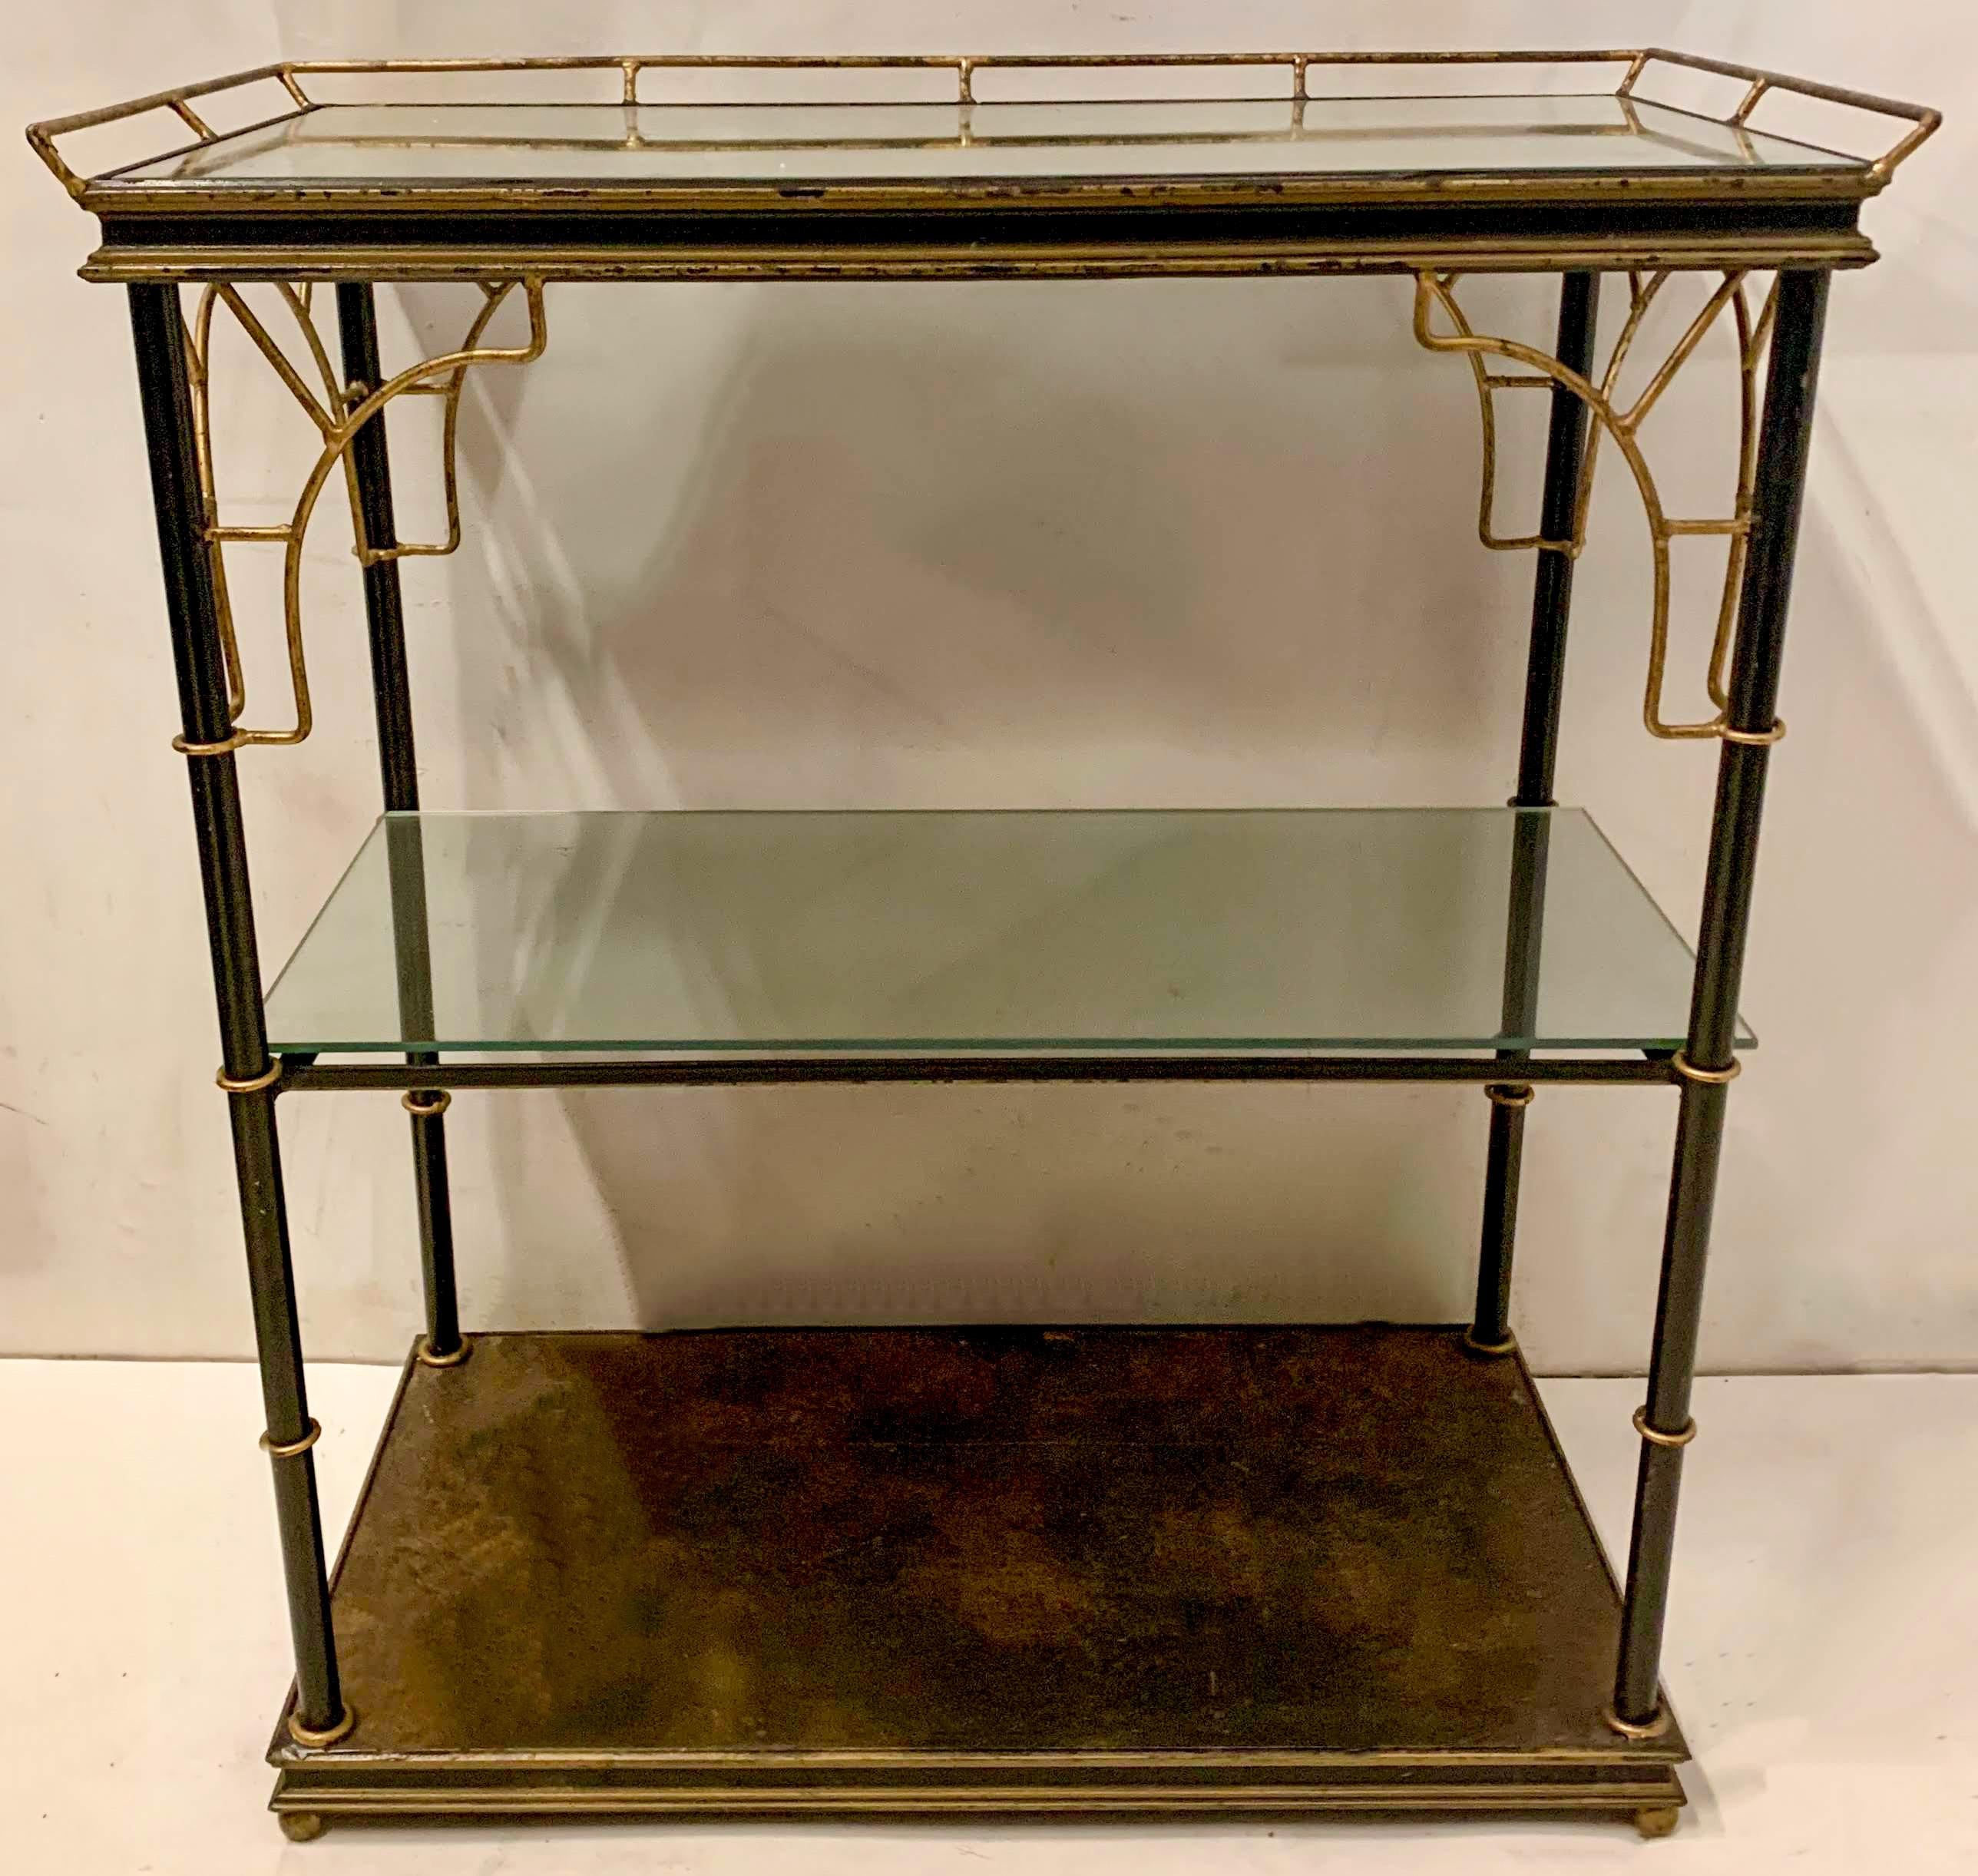 This is an English Hollywood Regency Era tole faux bamboo mirrored etagere. The supports are ebonized metal, while the corner faux bamboo supports are brass. Each shelf is a removable mirror. It shows some age wear to the frame that is more in line